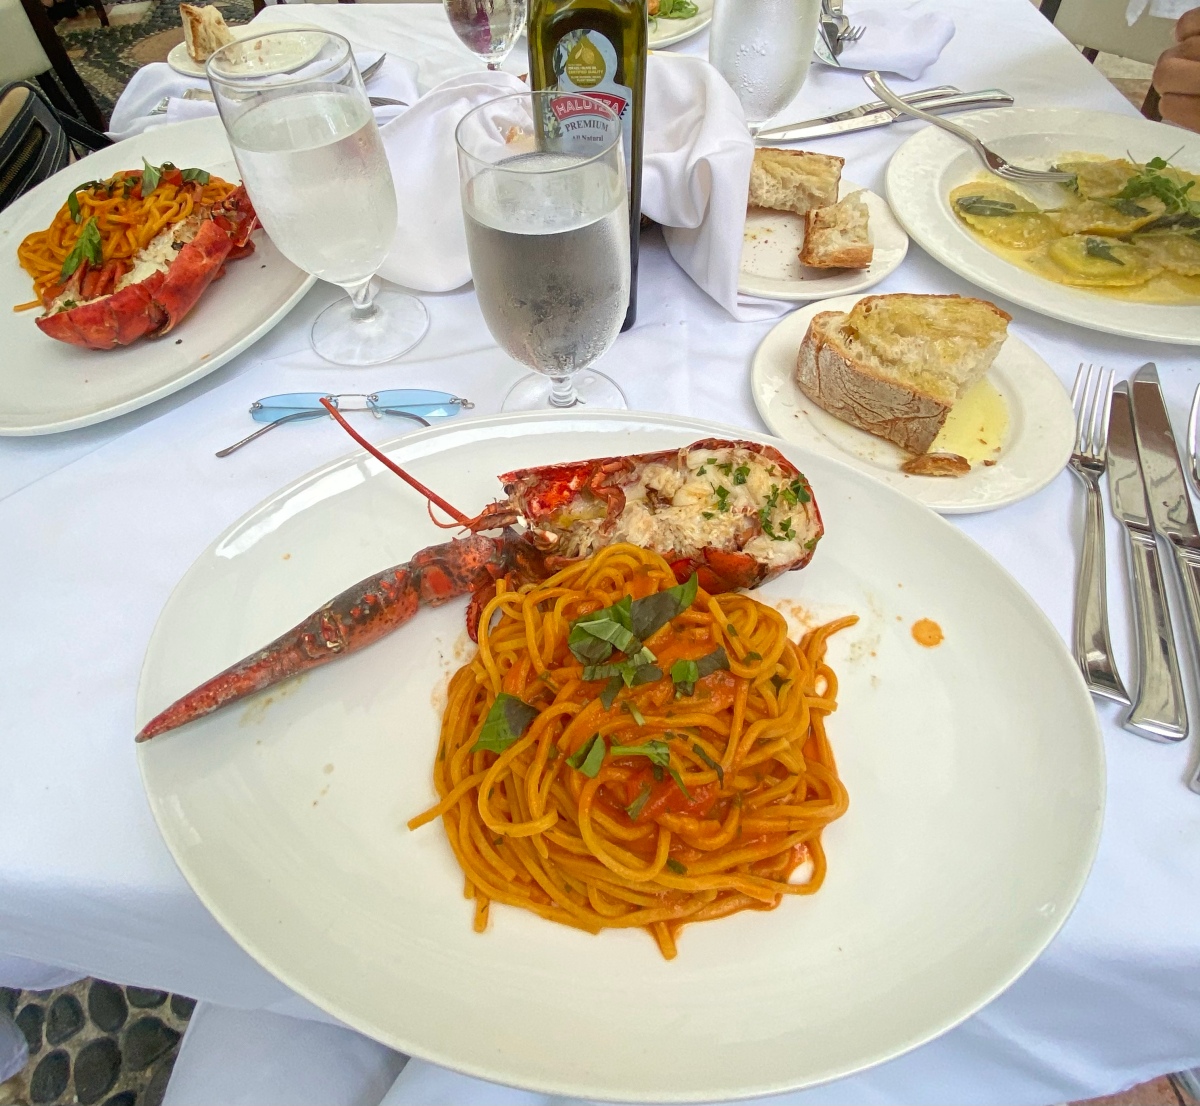 Lunch at the Gianni Versace Mansion: Undervalued or Overrated?